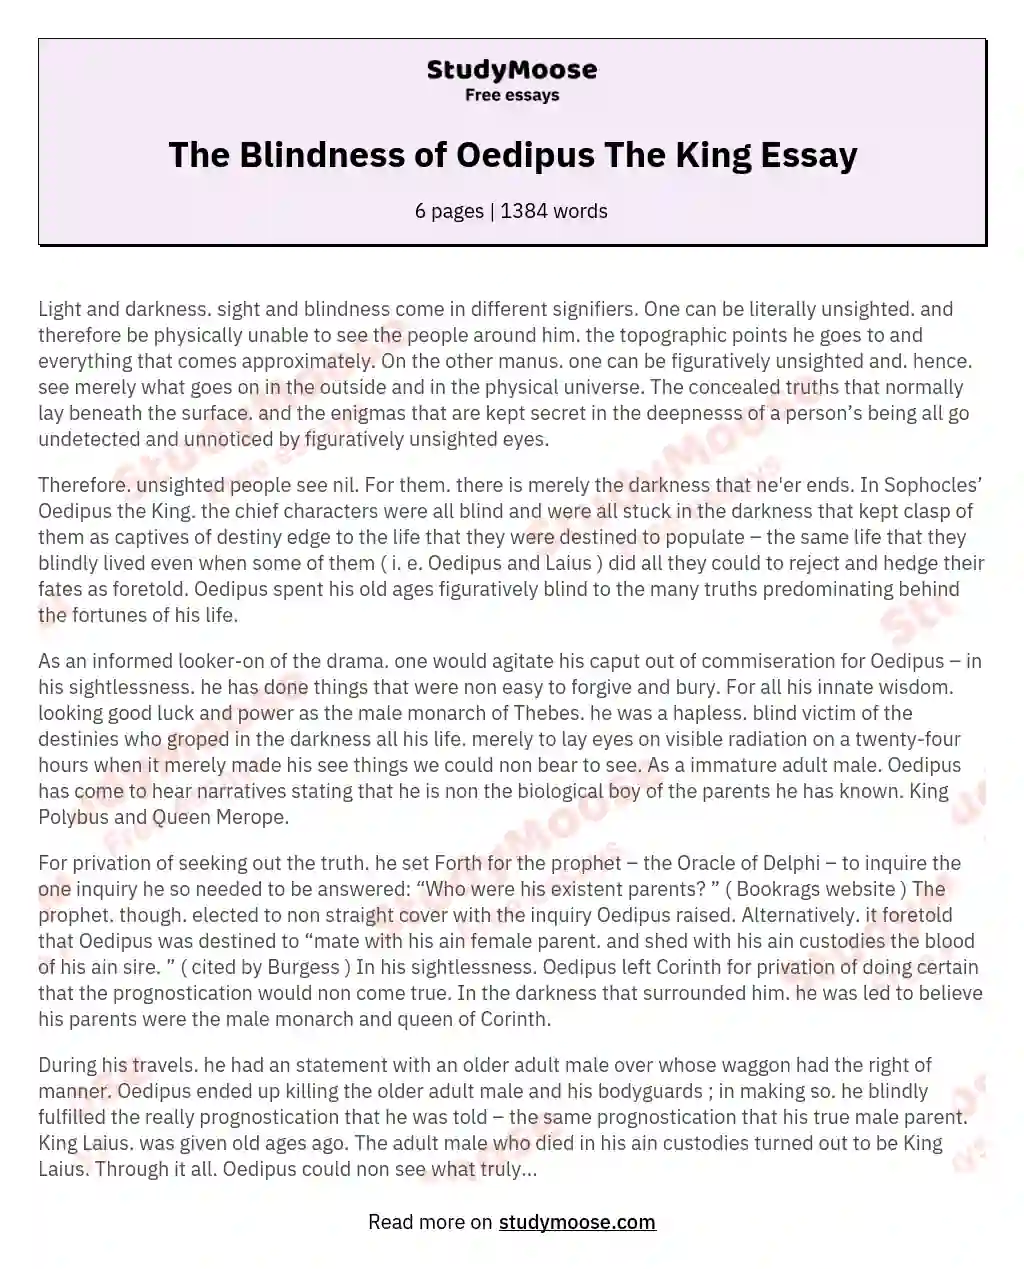 The Blindness of Oedipus The King Essay